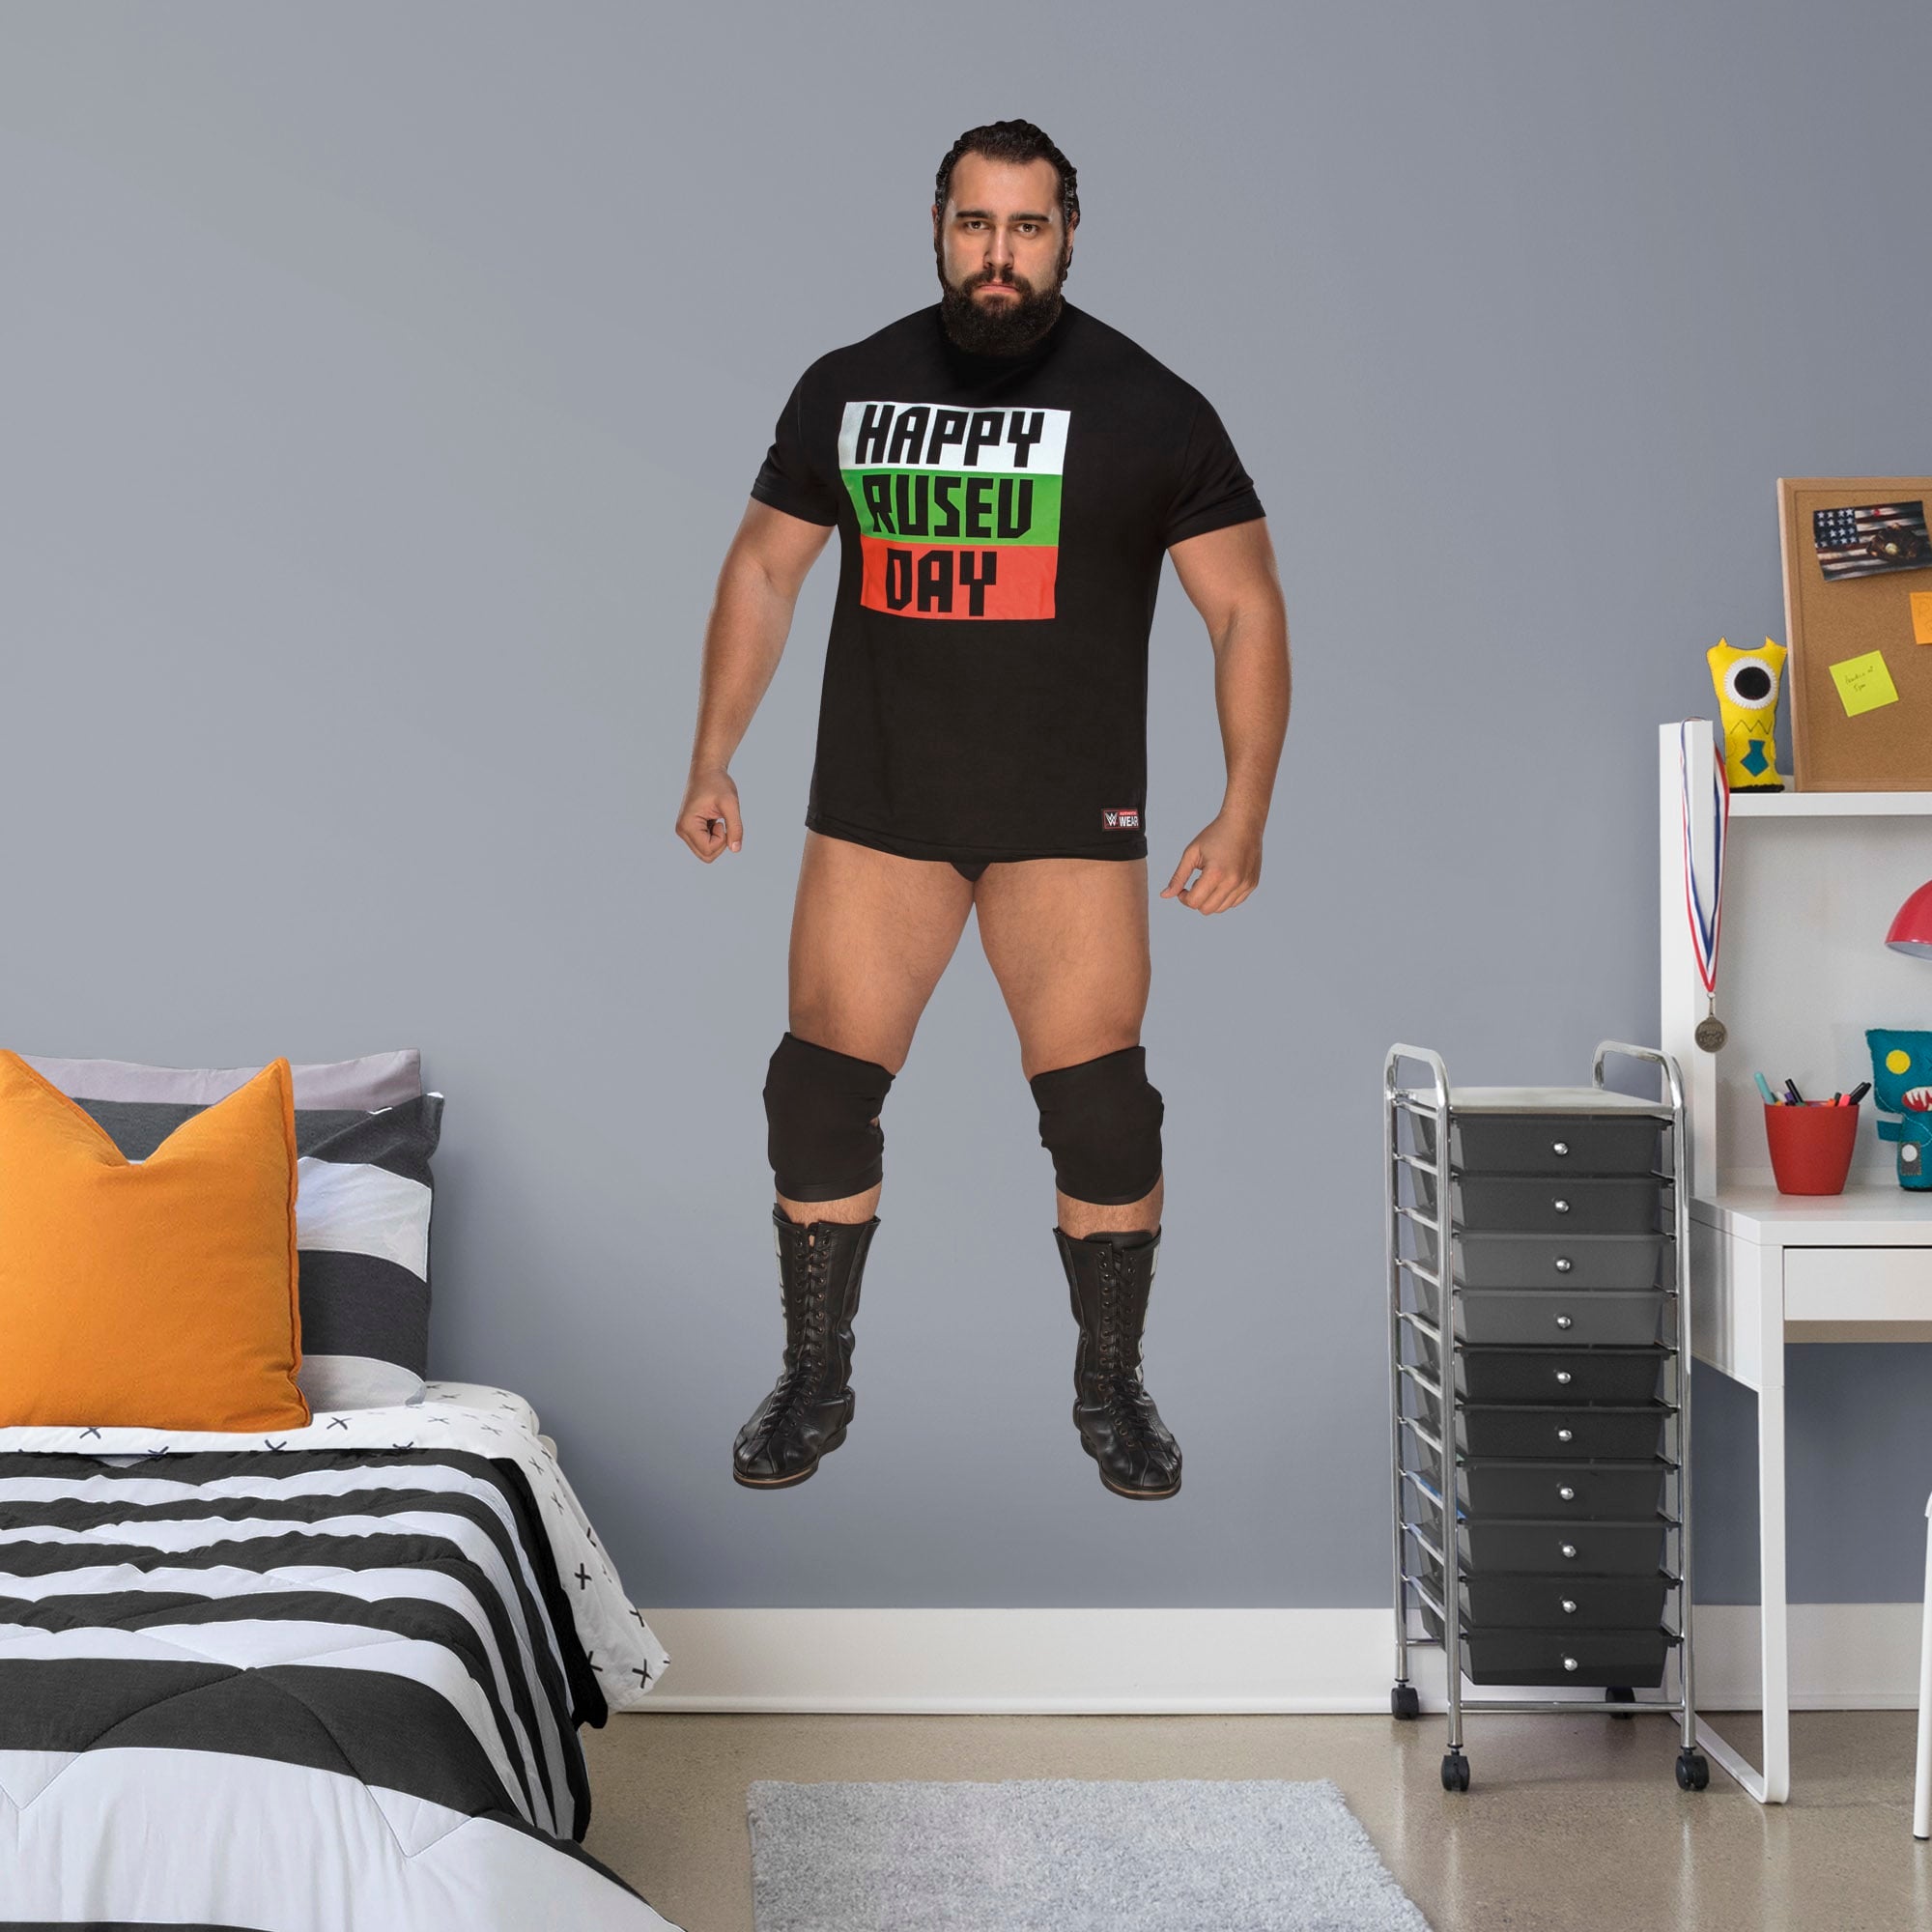 Rusev for WWE - Officially Licensed Removable Wall Decal Life-Size Superstar + 2 Decals (35"W x 78"H) by Fathead | Vinyl